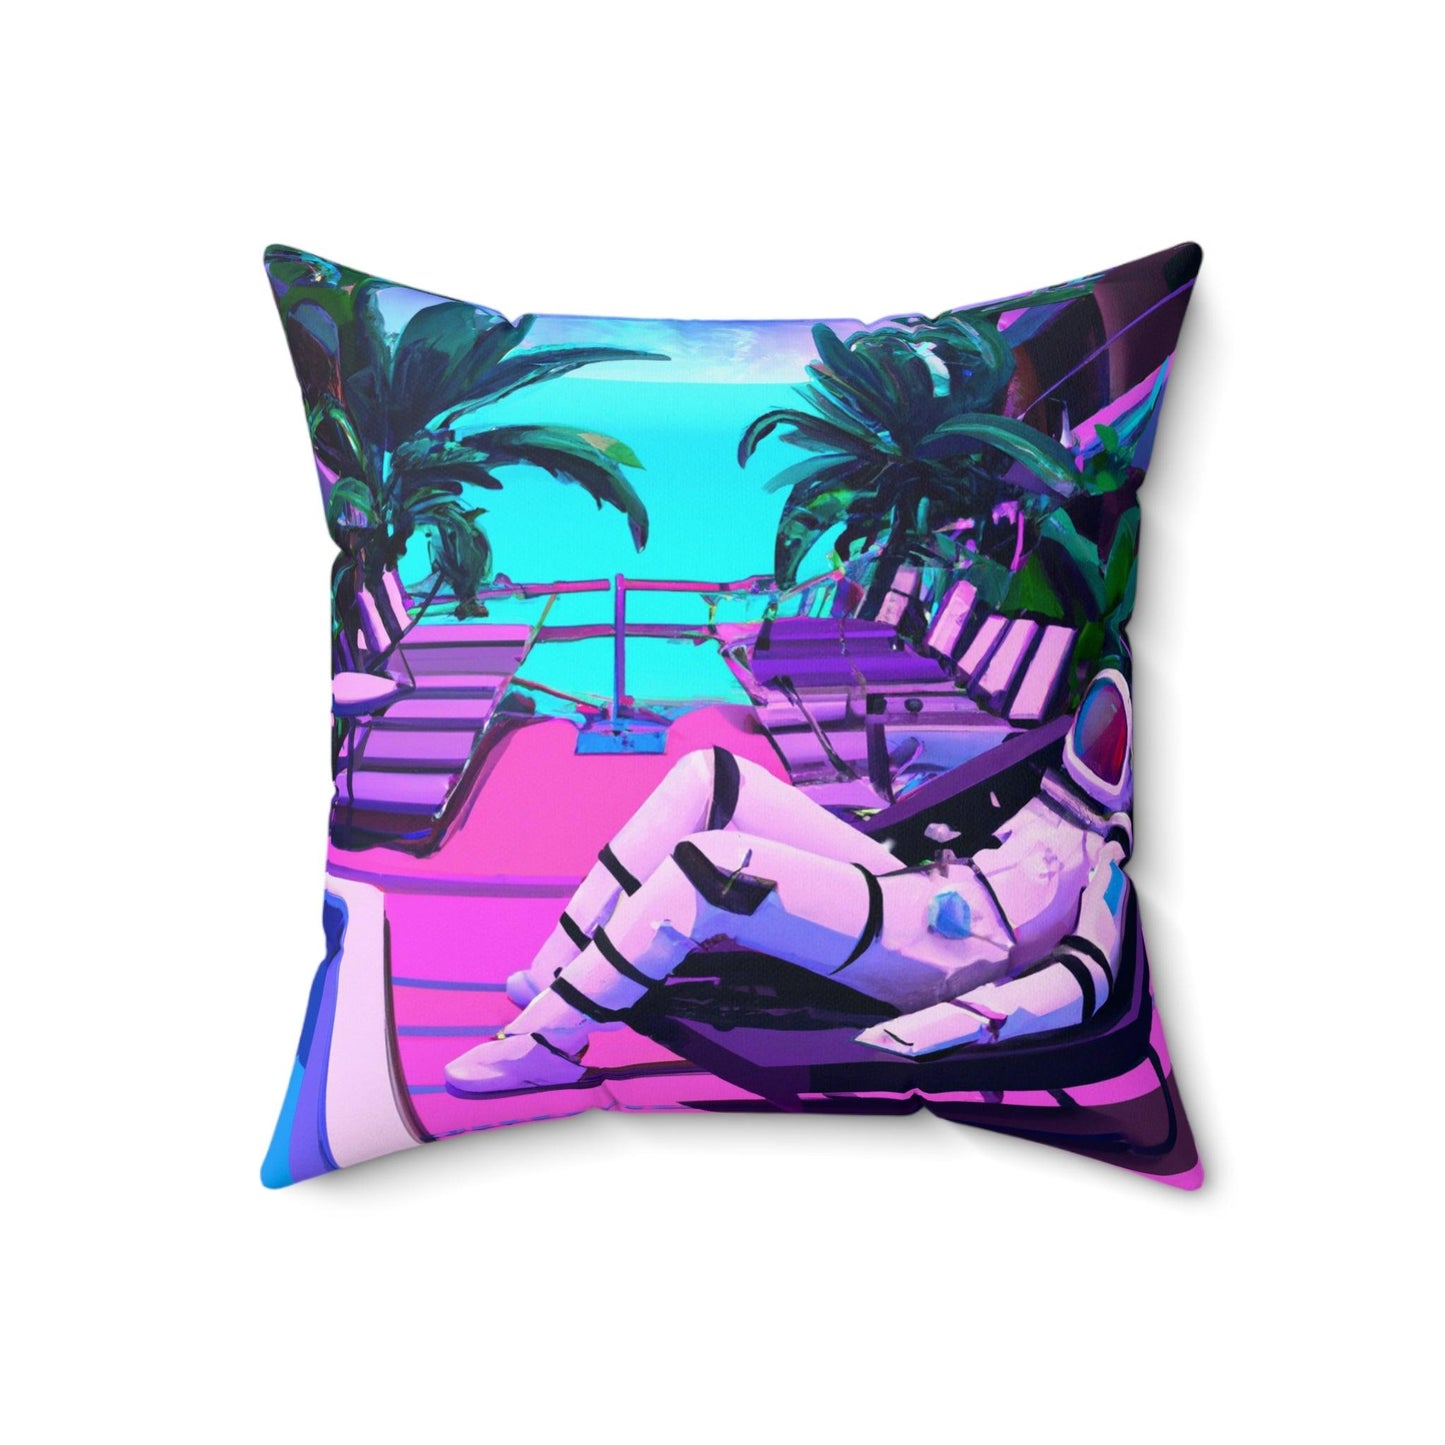 Lounging Astronaut Printed Throw Pillow - MAIA HOMES